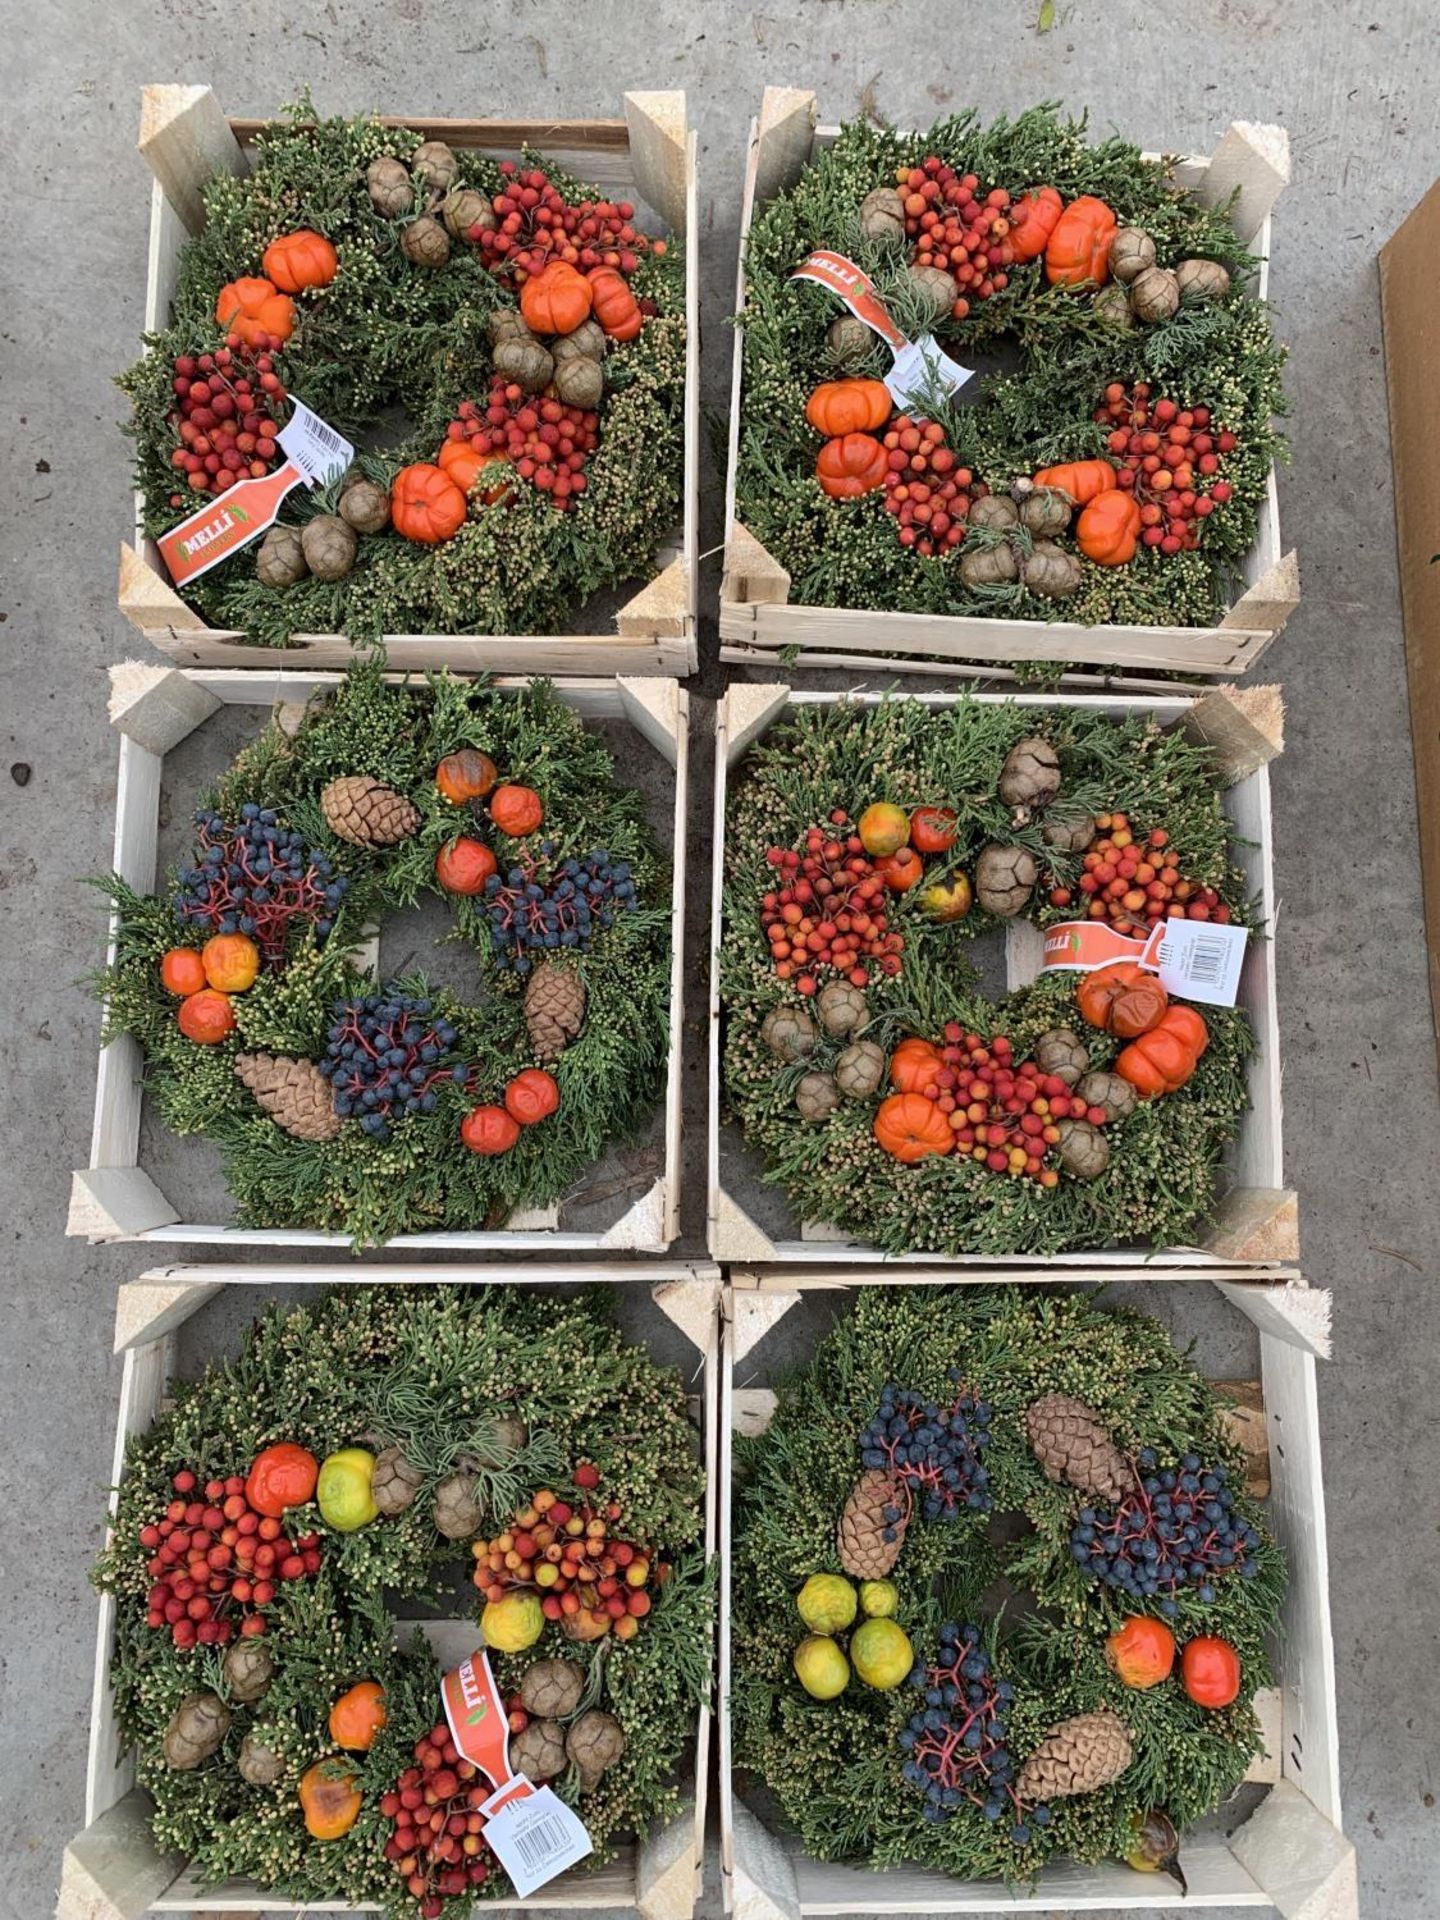 SIX WINTER WREATHS IN A PRESENTATION CRATE + VAT TO BE SOLD FOR THE SIX